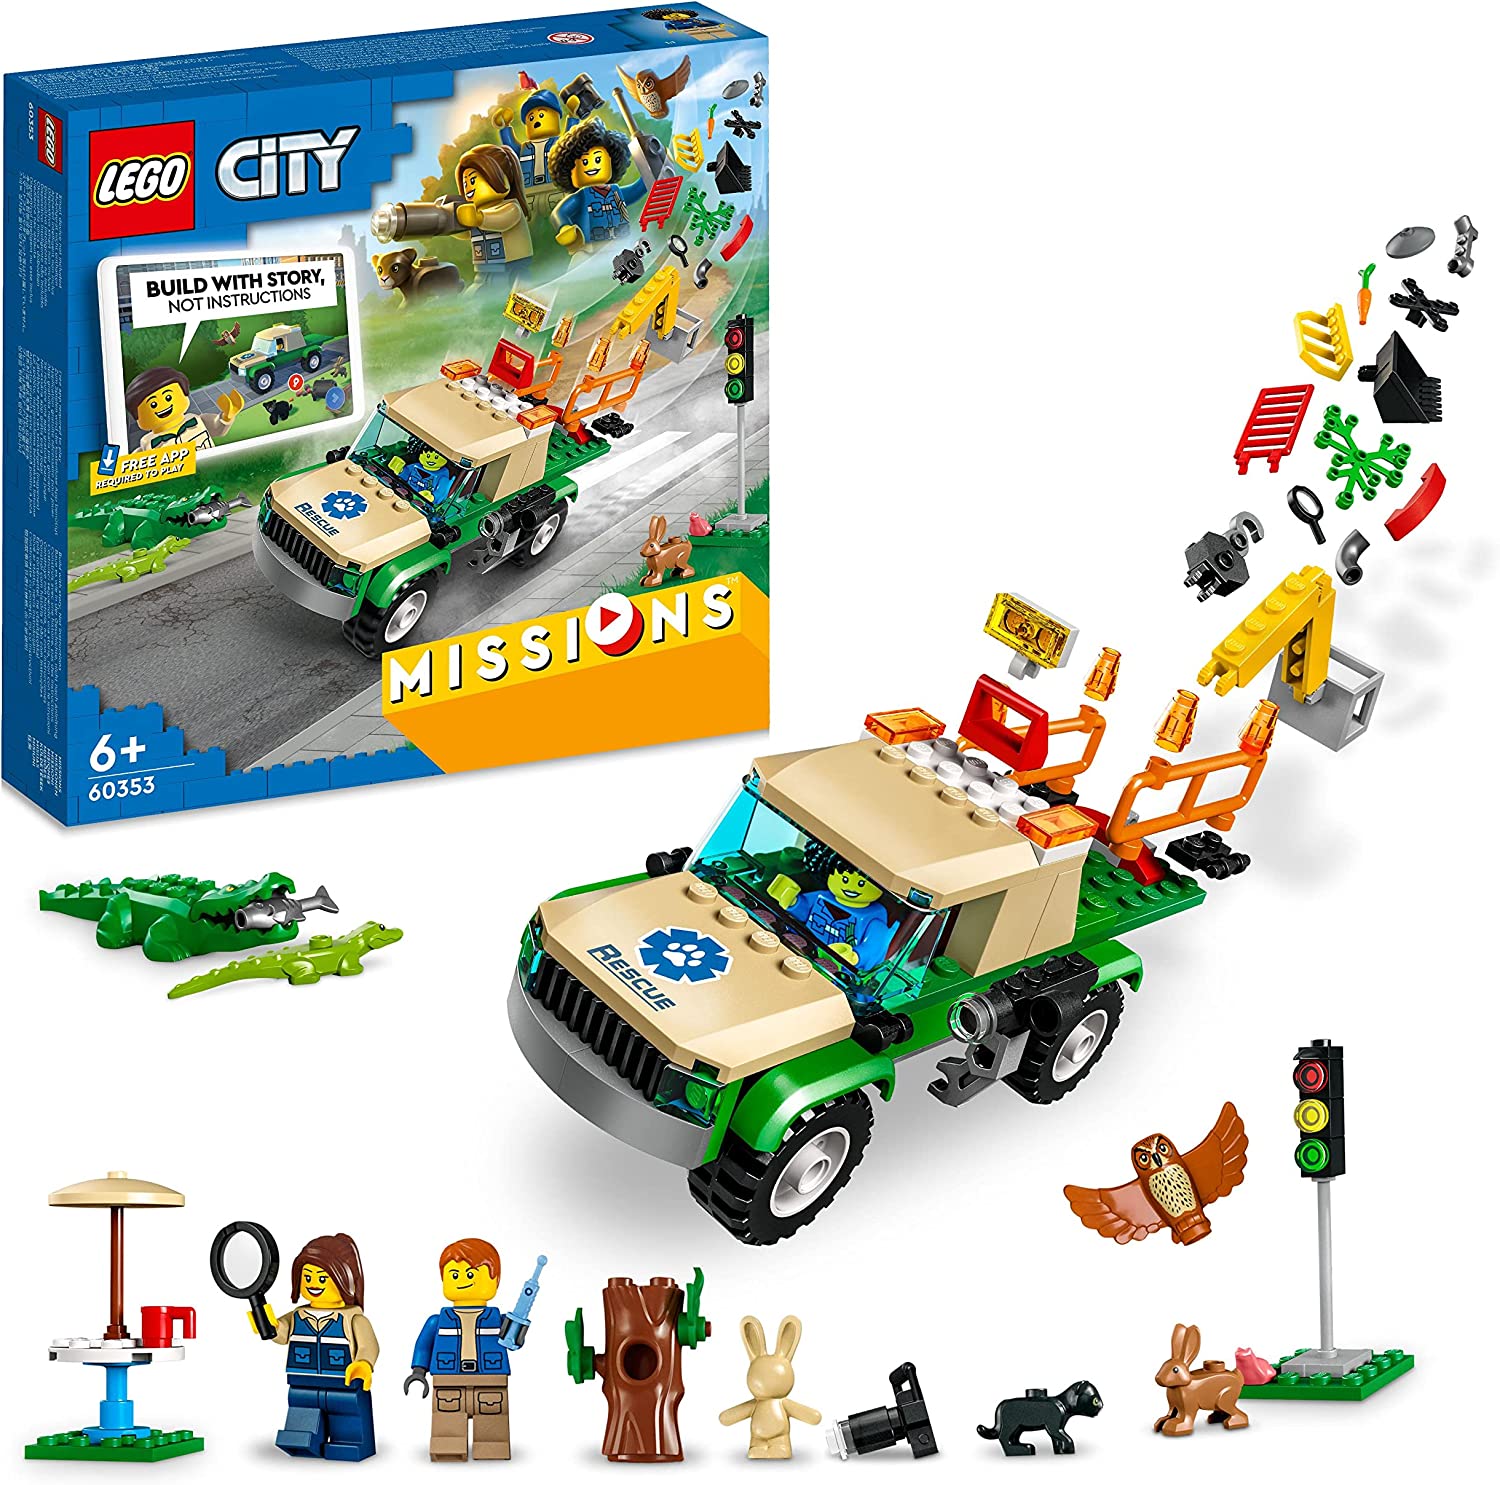 LEGO 60353 City Animal Rescue Missions, Interactive Digital Adventure Play Set with Pickup, 3 Mini Figures and Animal Figures, Toy from 6 Years